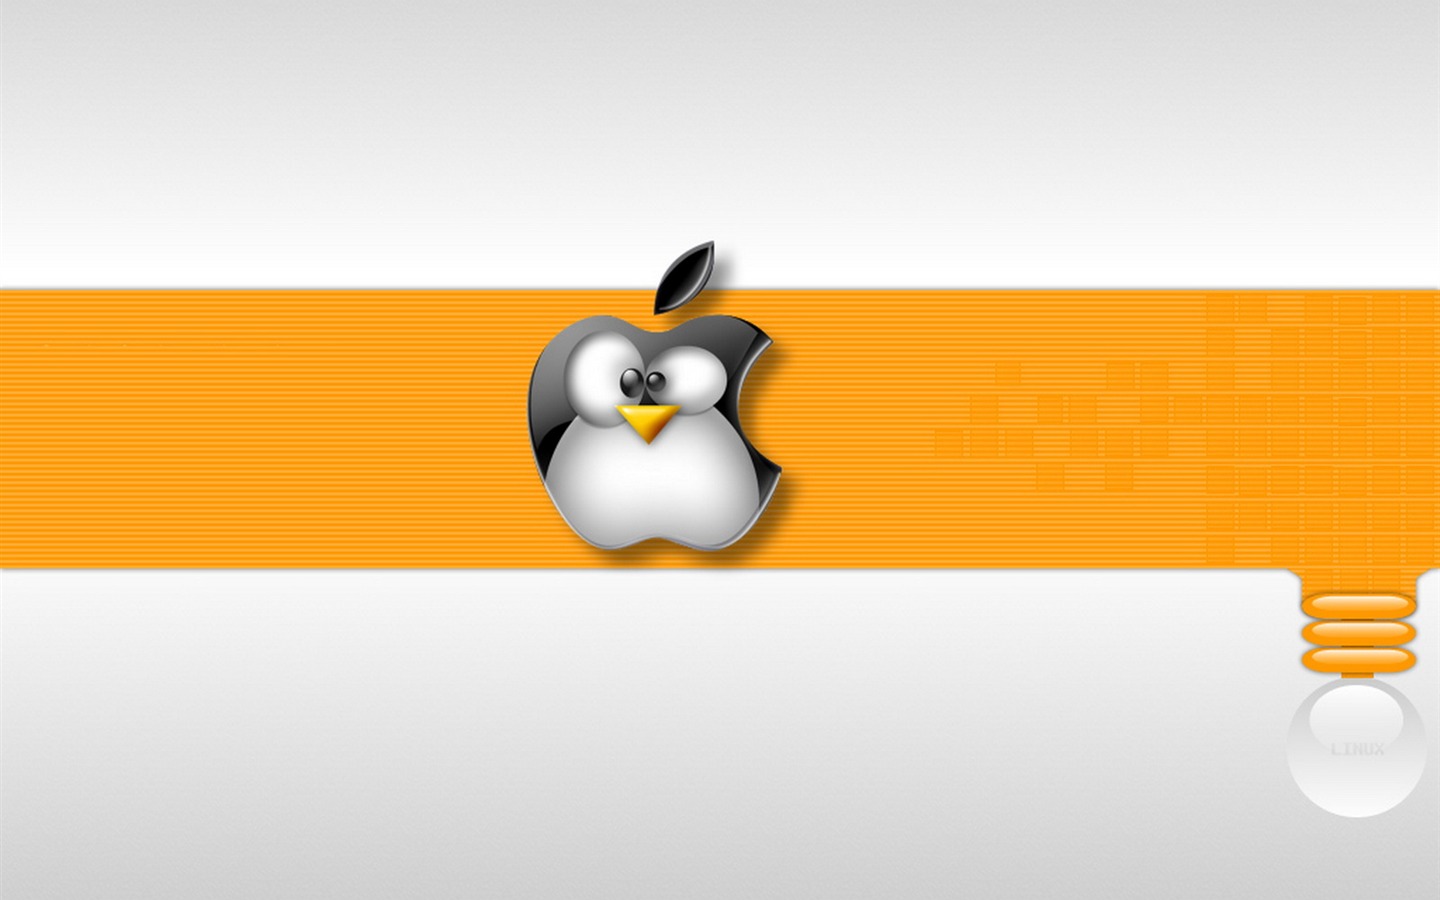 Linux tapety (2) #3 - 1440x900